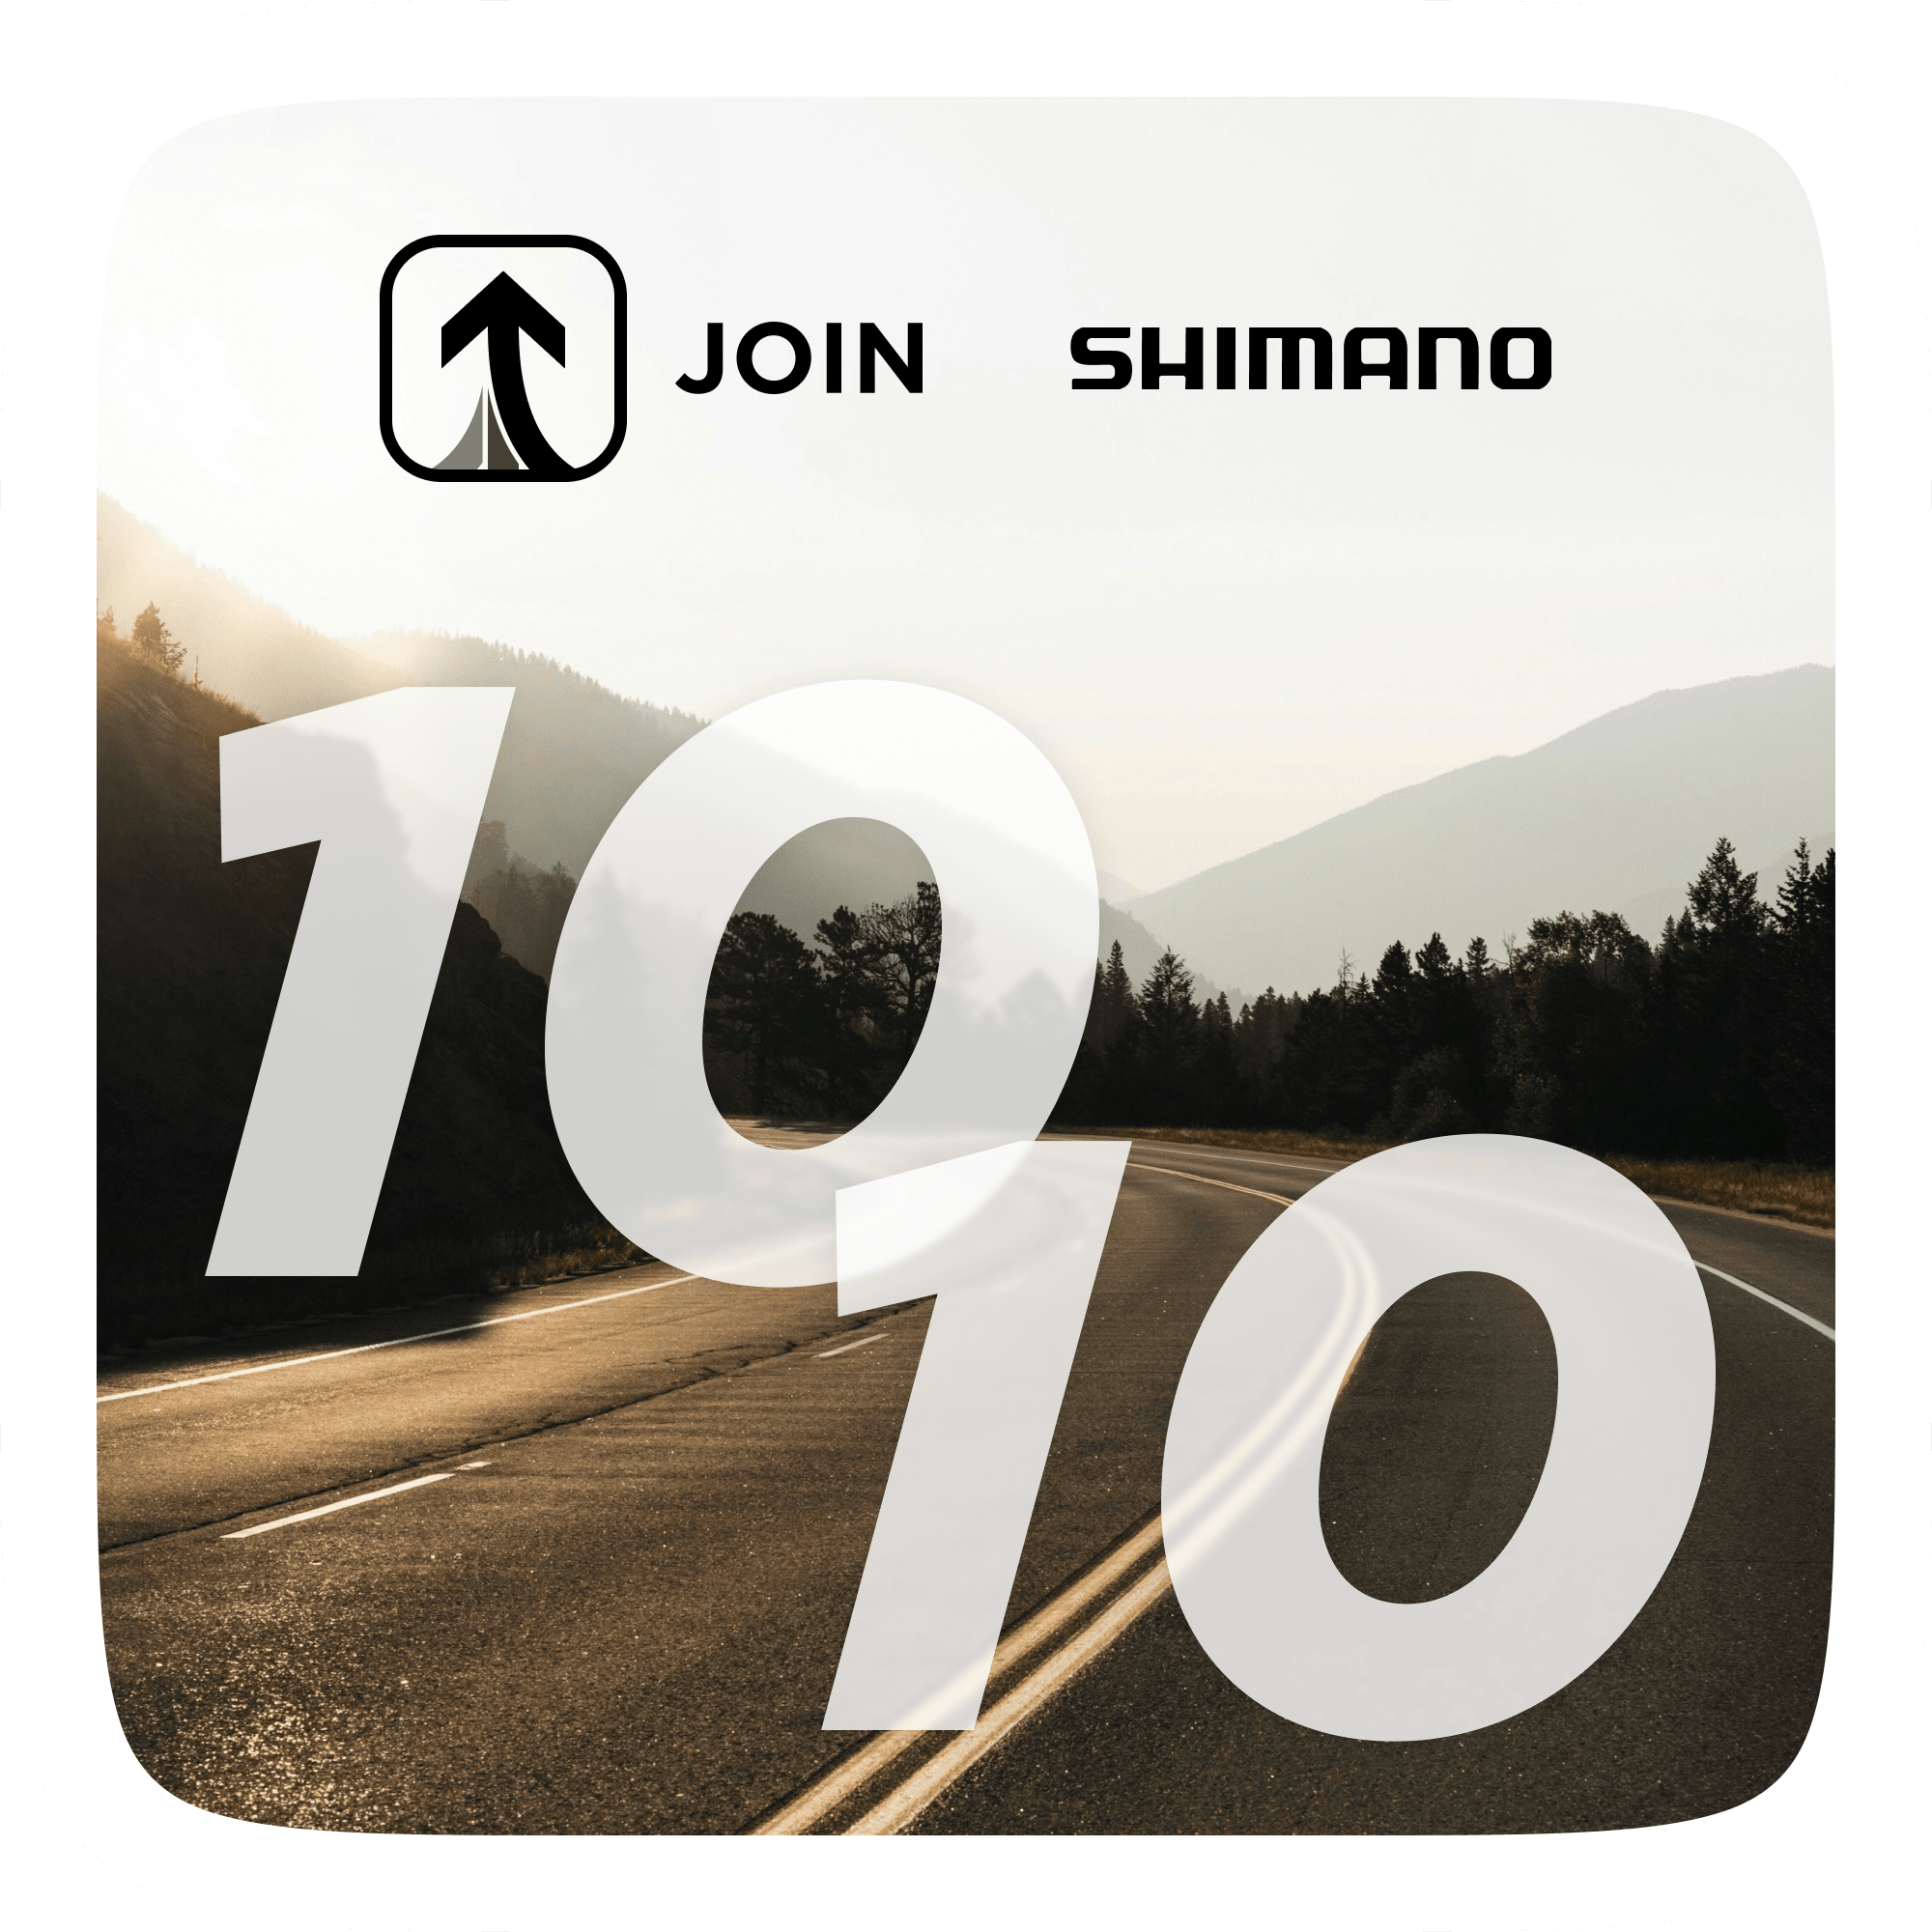 10 / 10 challenge by JOIN with Shimano